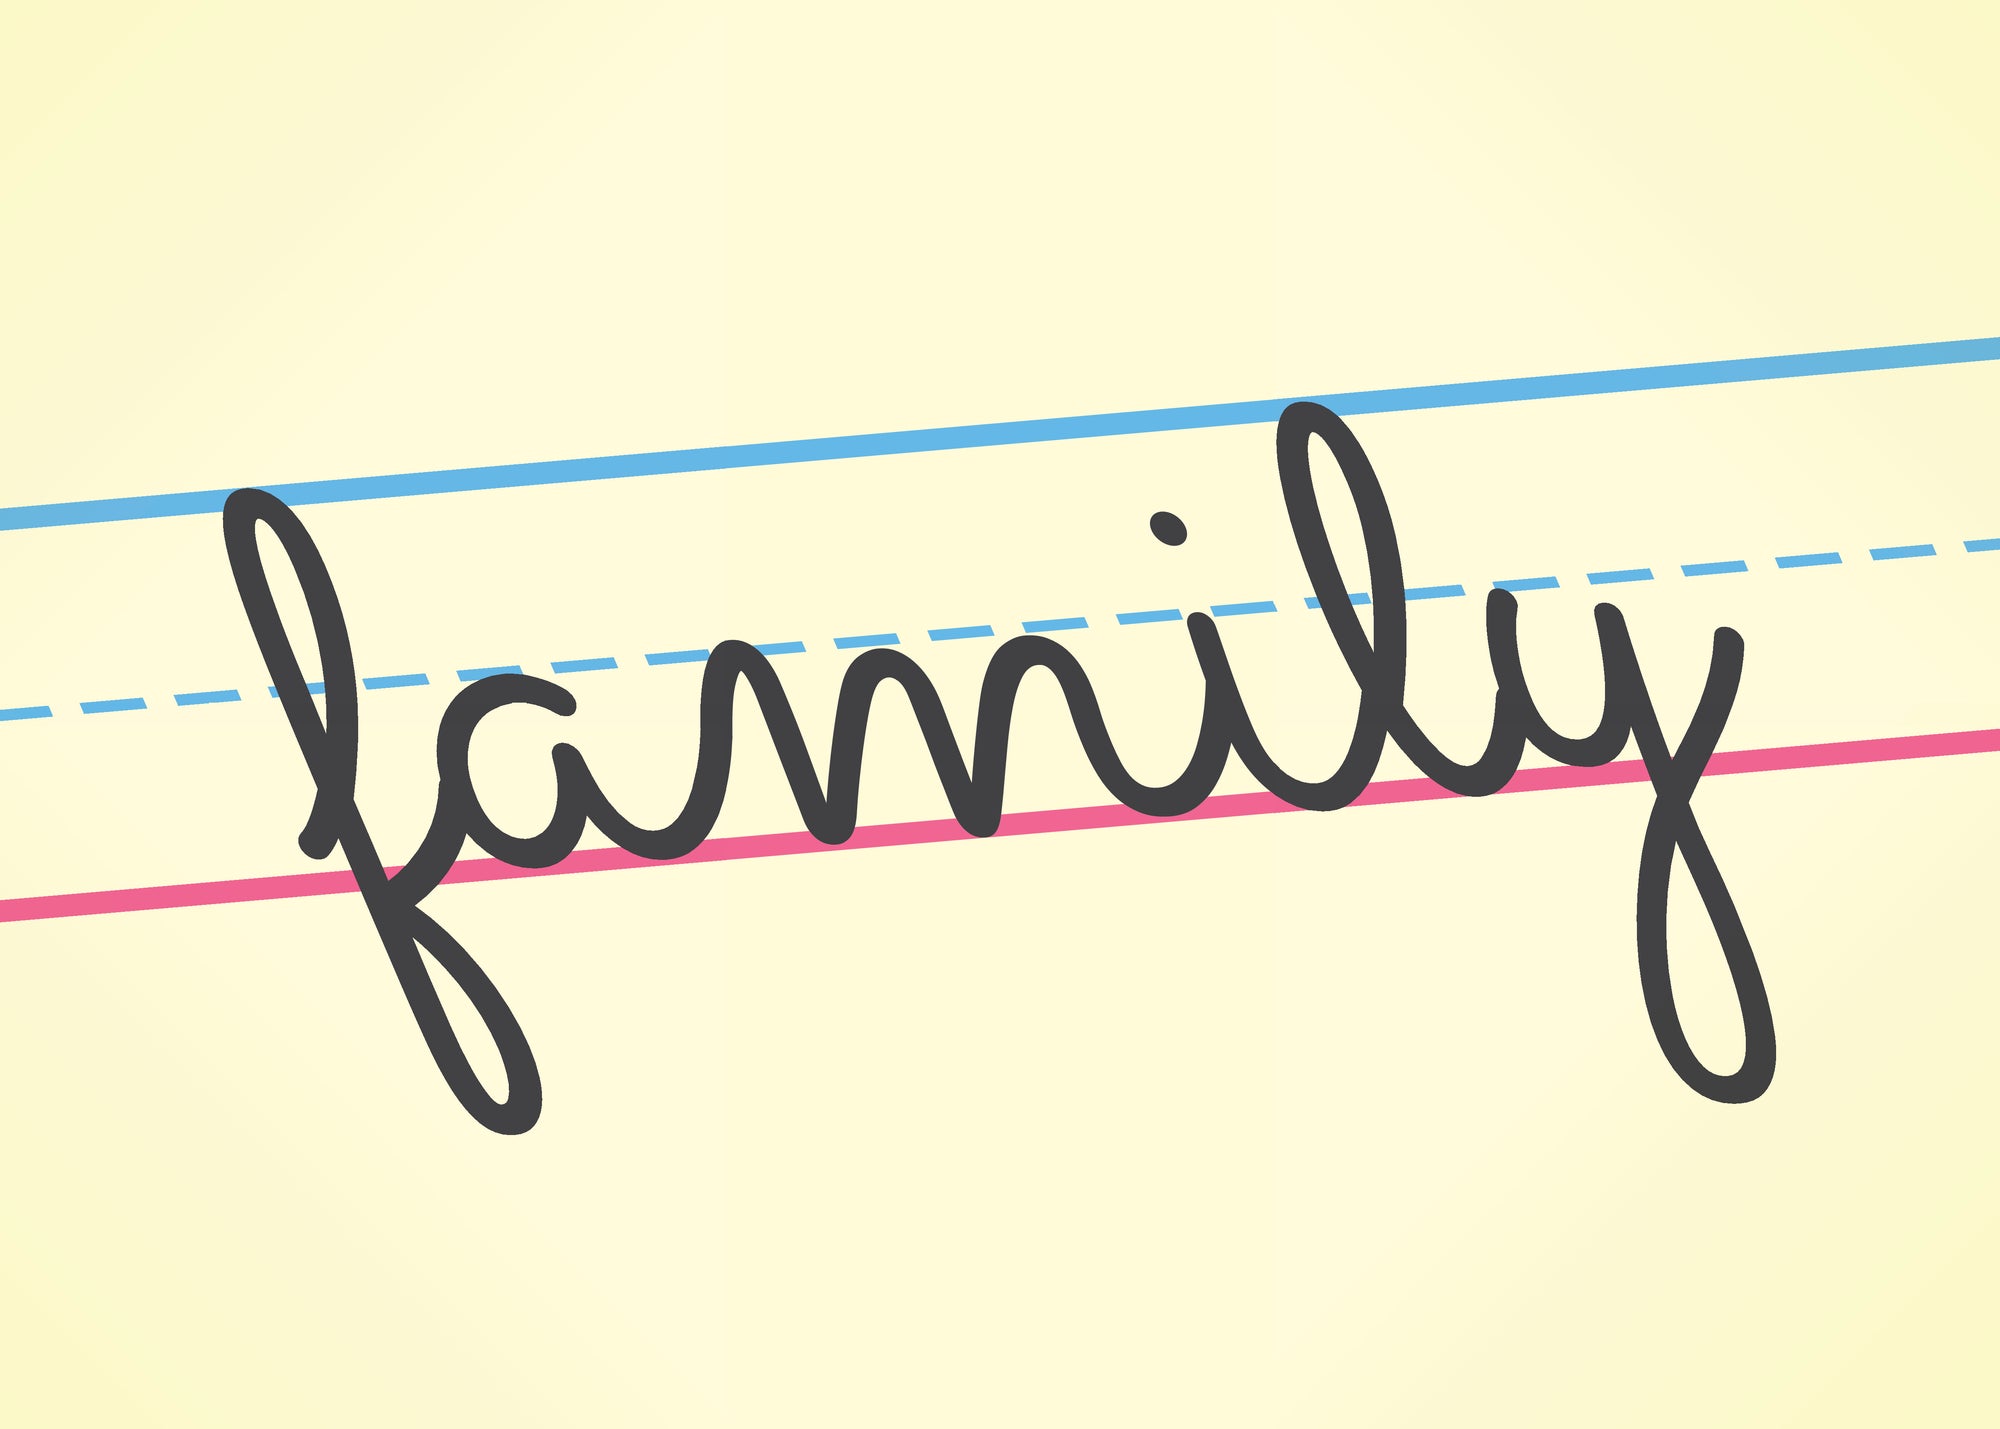 Illustration of the word family written in cursive on a yellow lined paper background